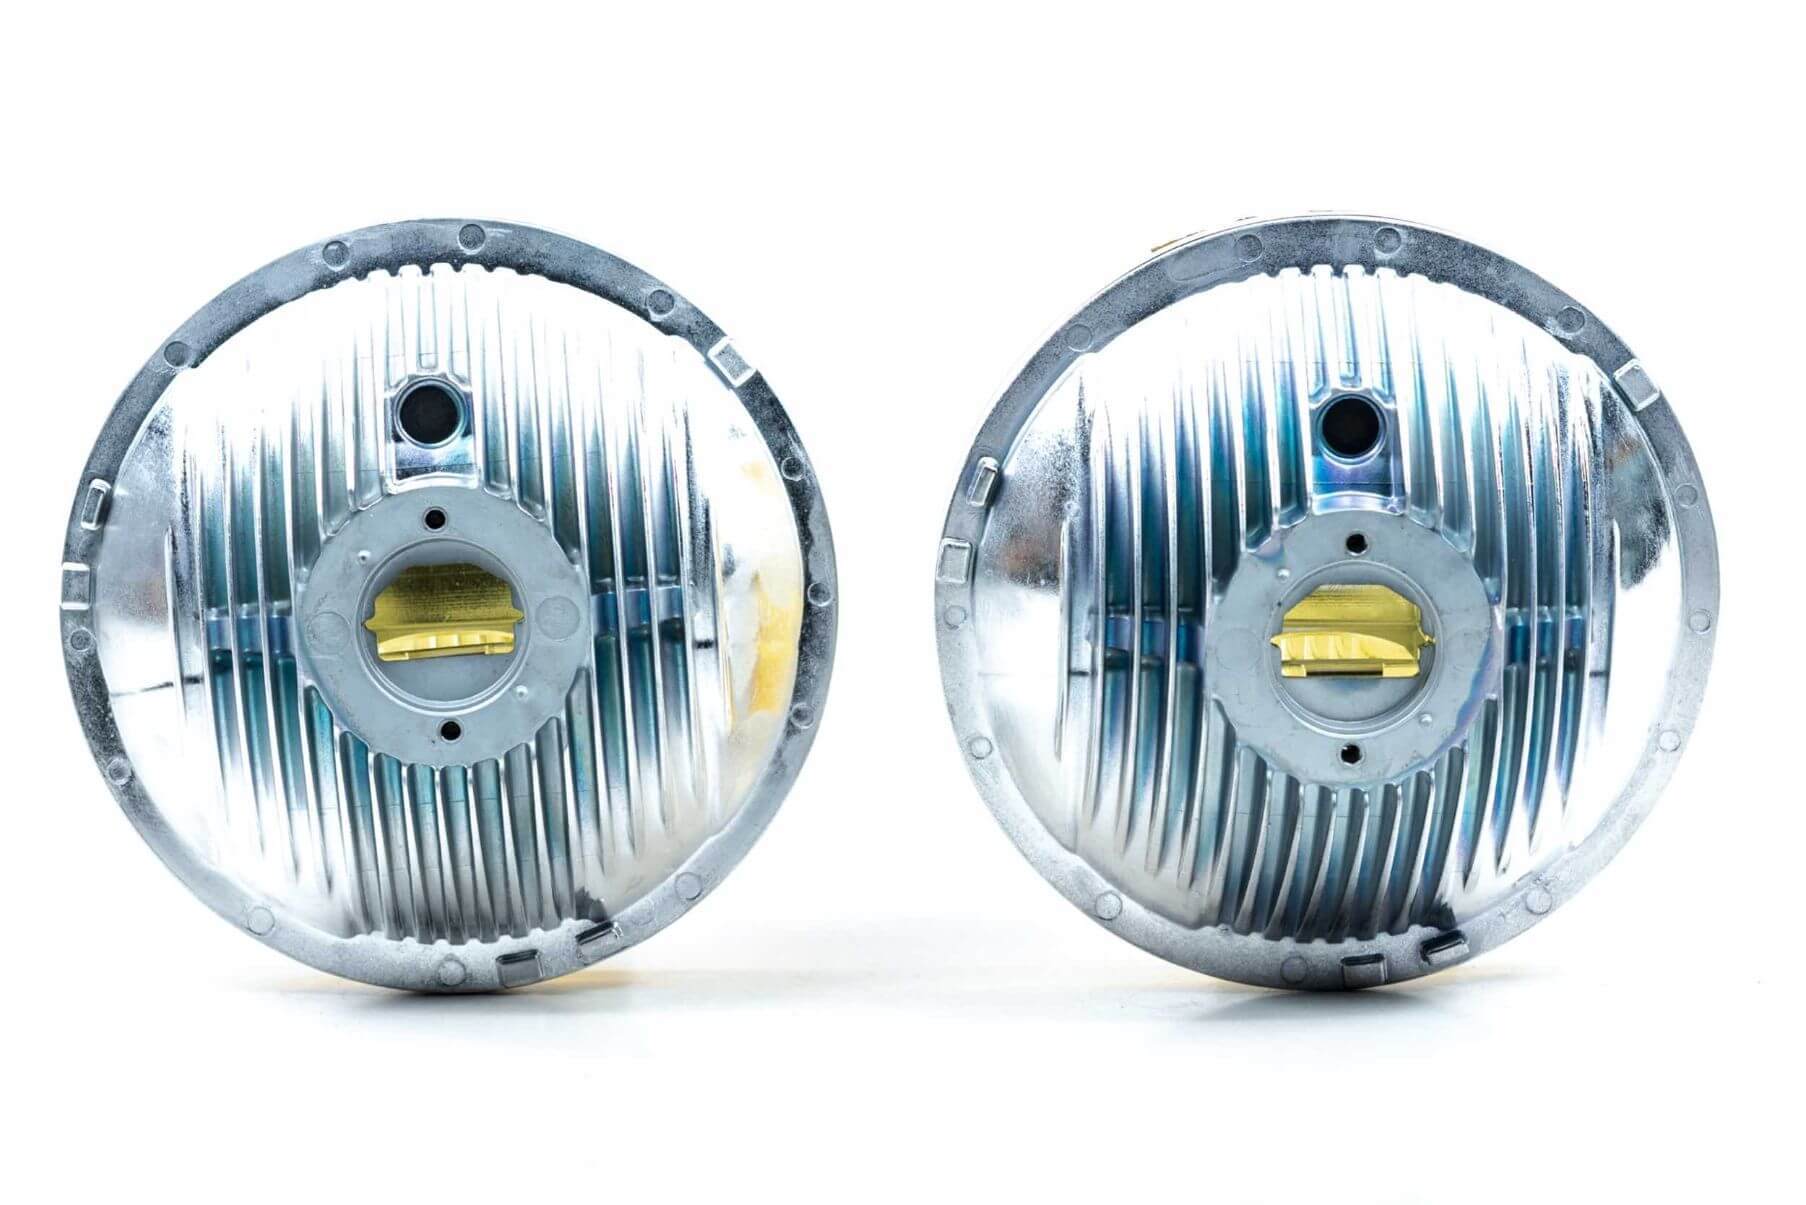 Headlight LED 5.75in Round Each Housing Only